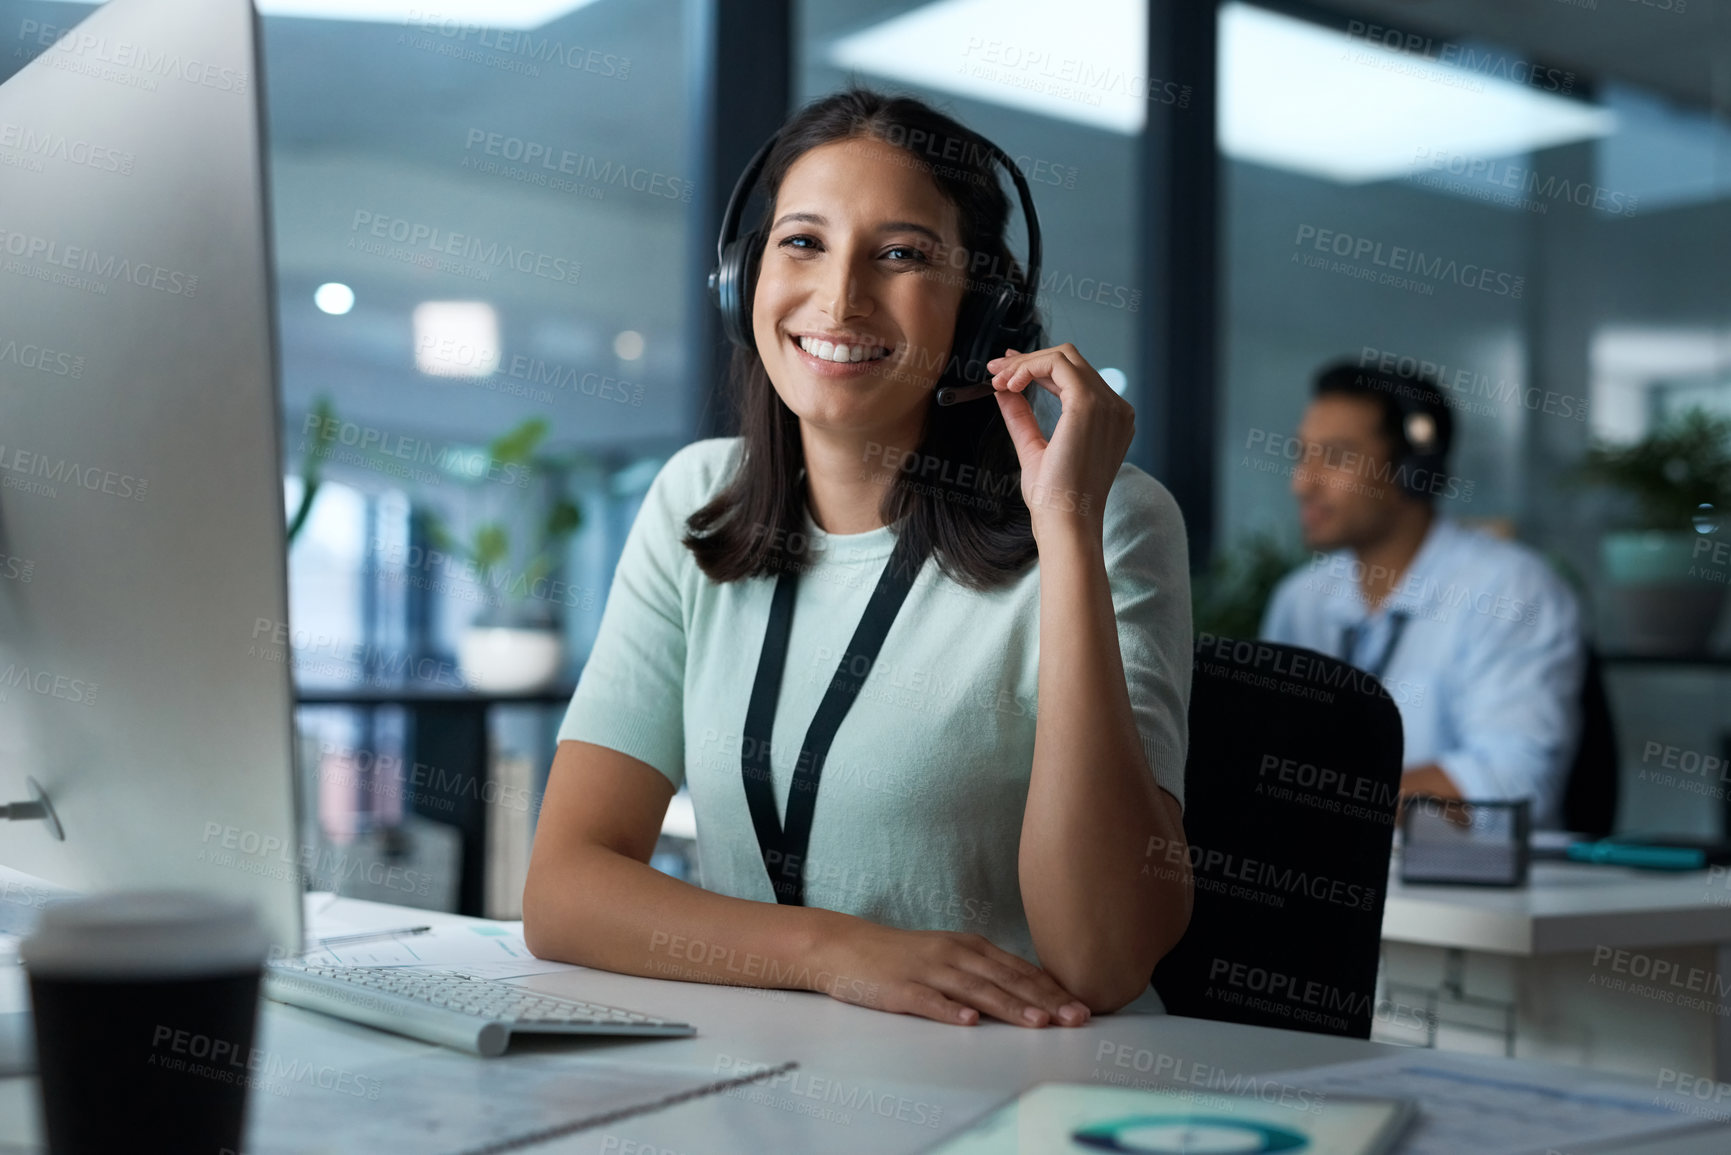 Buy stock photo Portrait of a young woman using a headset and computer in a modern office